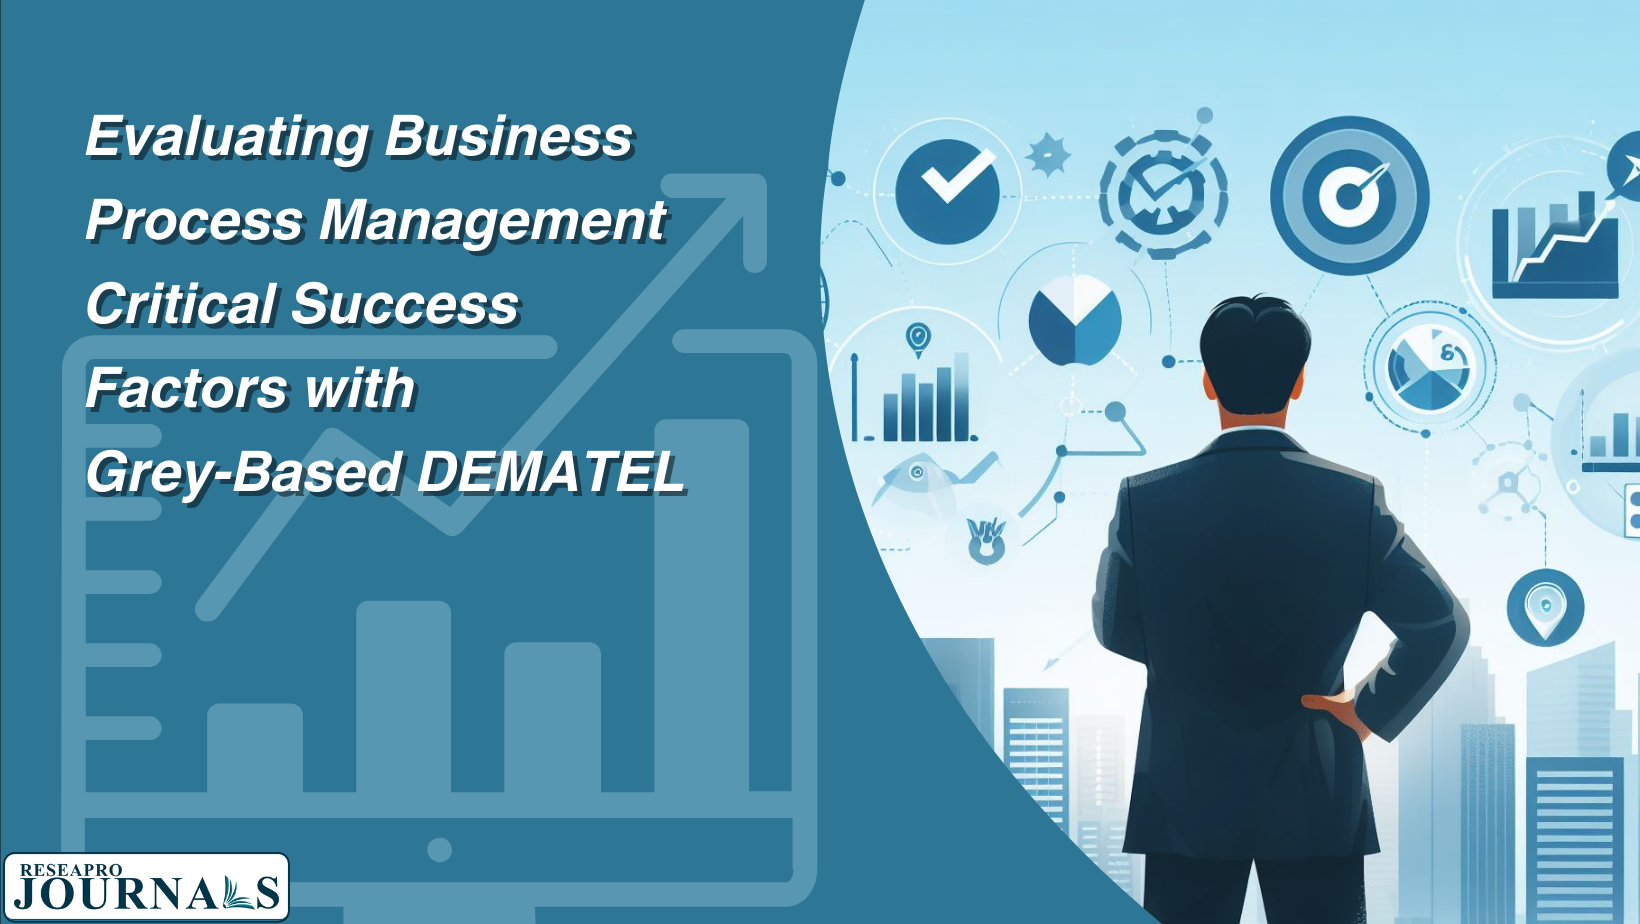 Evaluating Business Process Management Critical Success Factors with Grey-Based DEMATEL